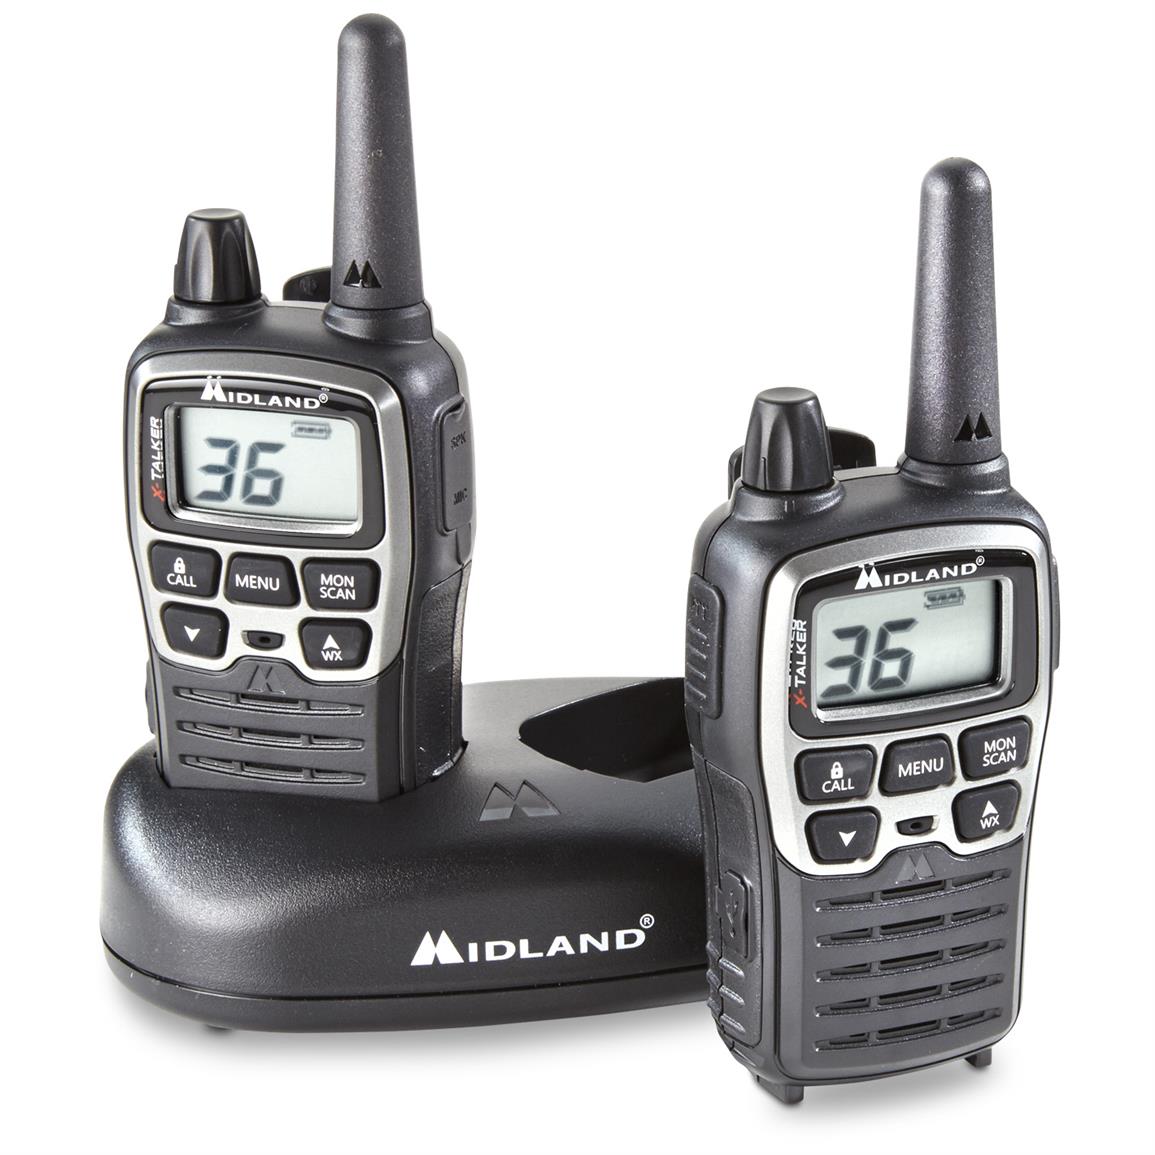 midland-x-talker-t71vp3-two-way-radios-2-pack-669001-cb-two-way